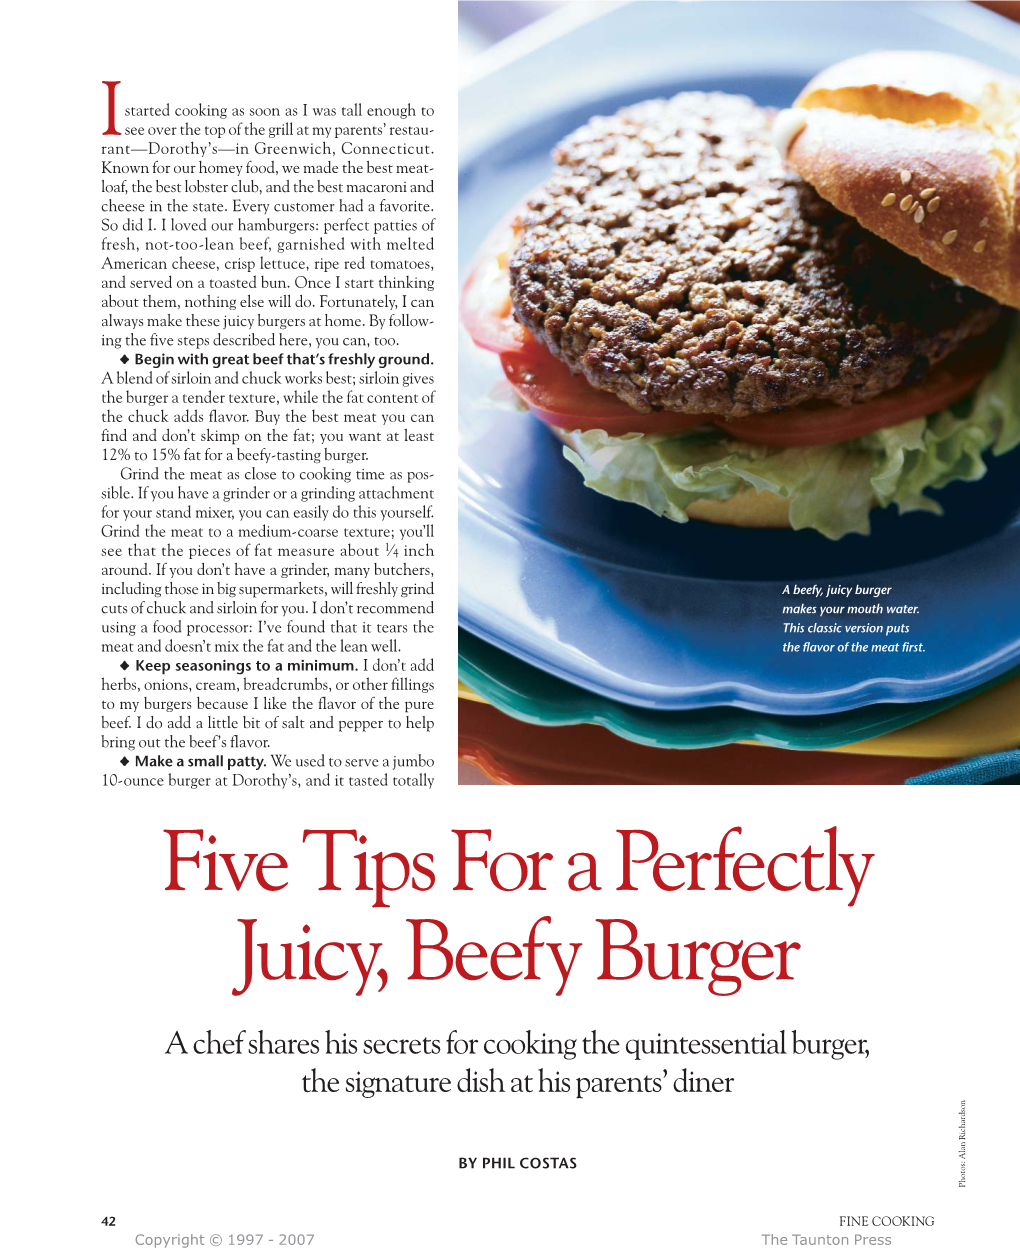 Five Tips for a Perfectly Juicy, Beefy Burger a Chef Shares His Secrets for Cooking the Quintessential Burger, the Signature Dish at His Parents’ Diner